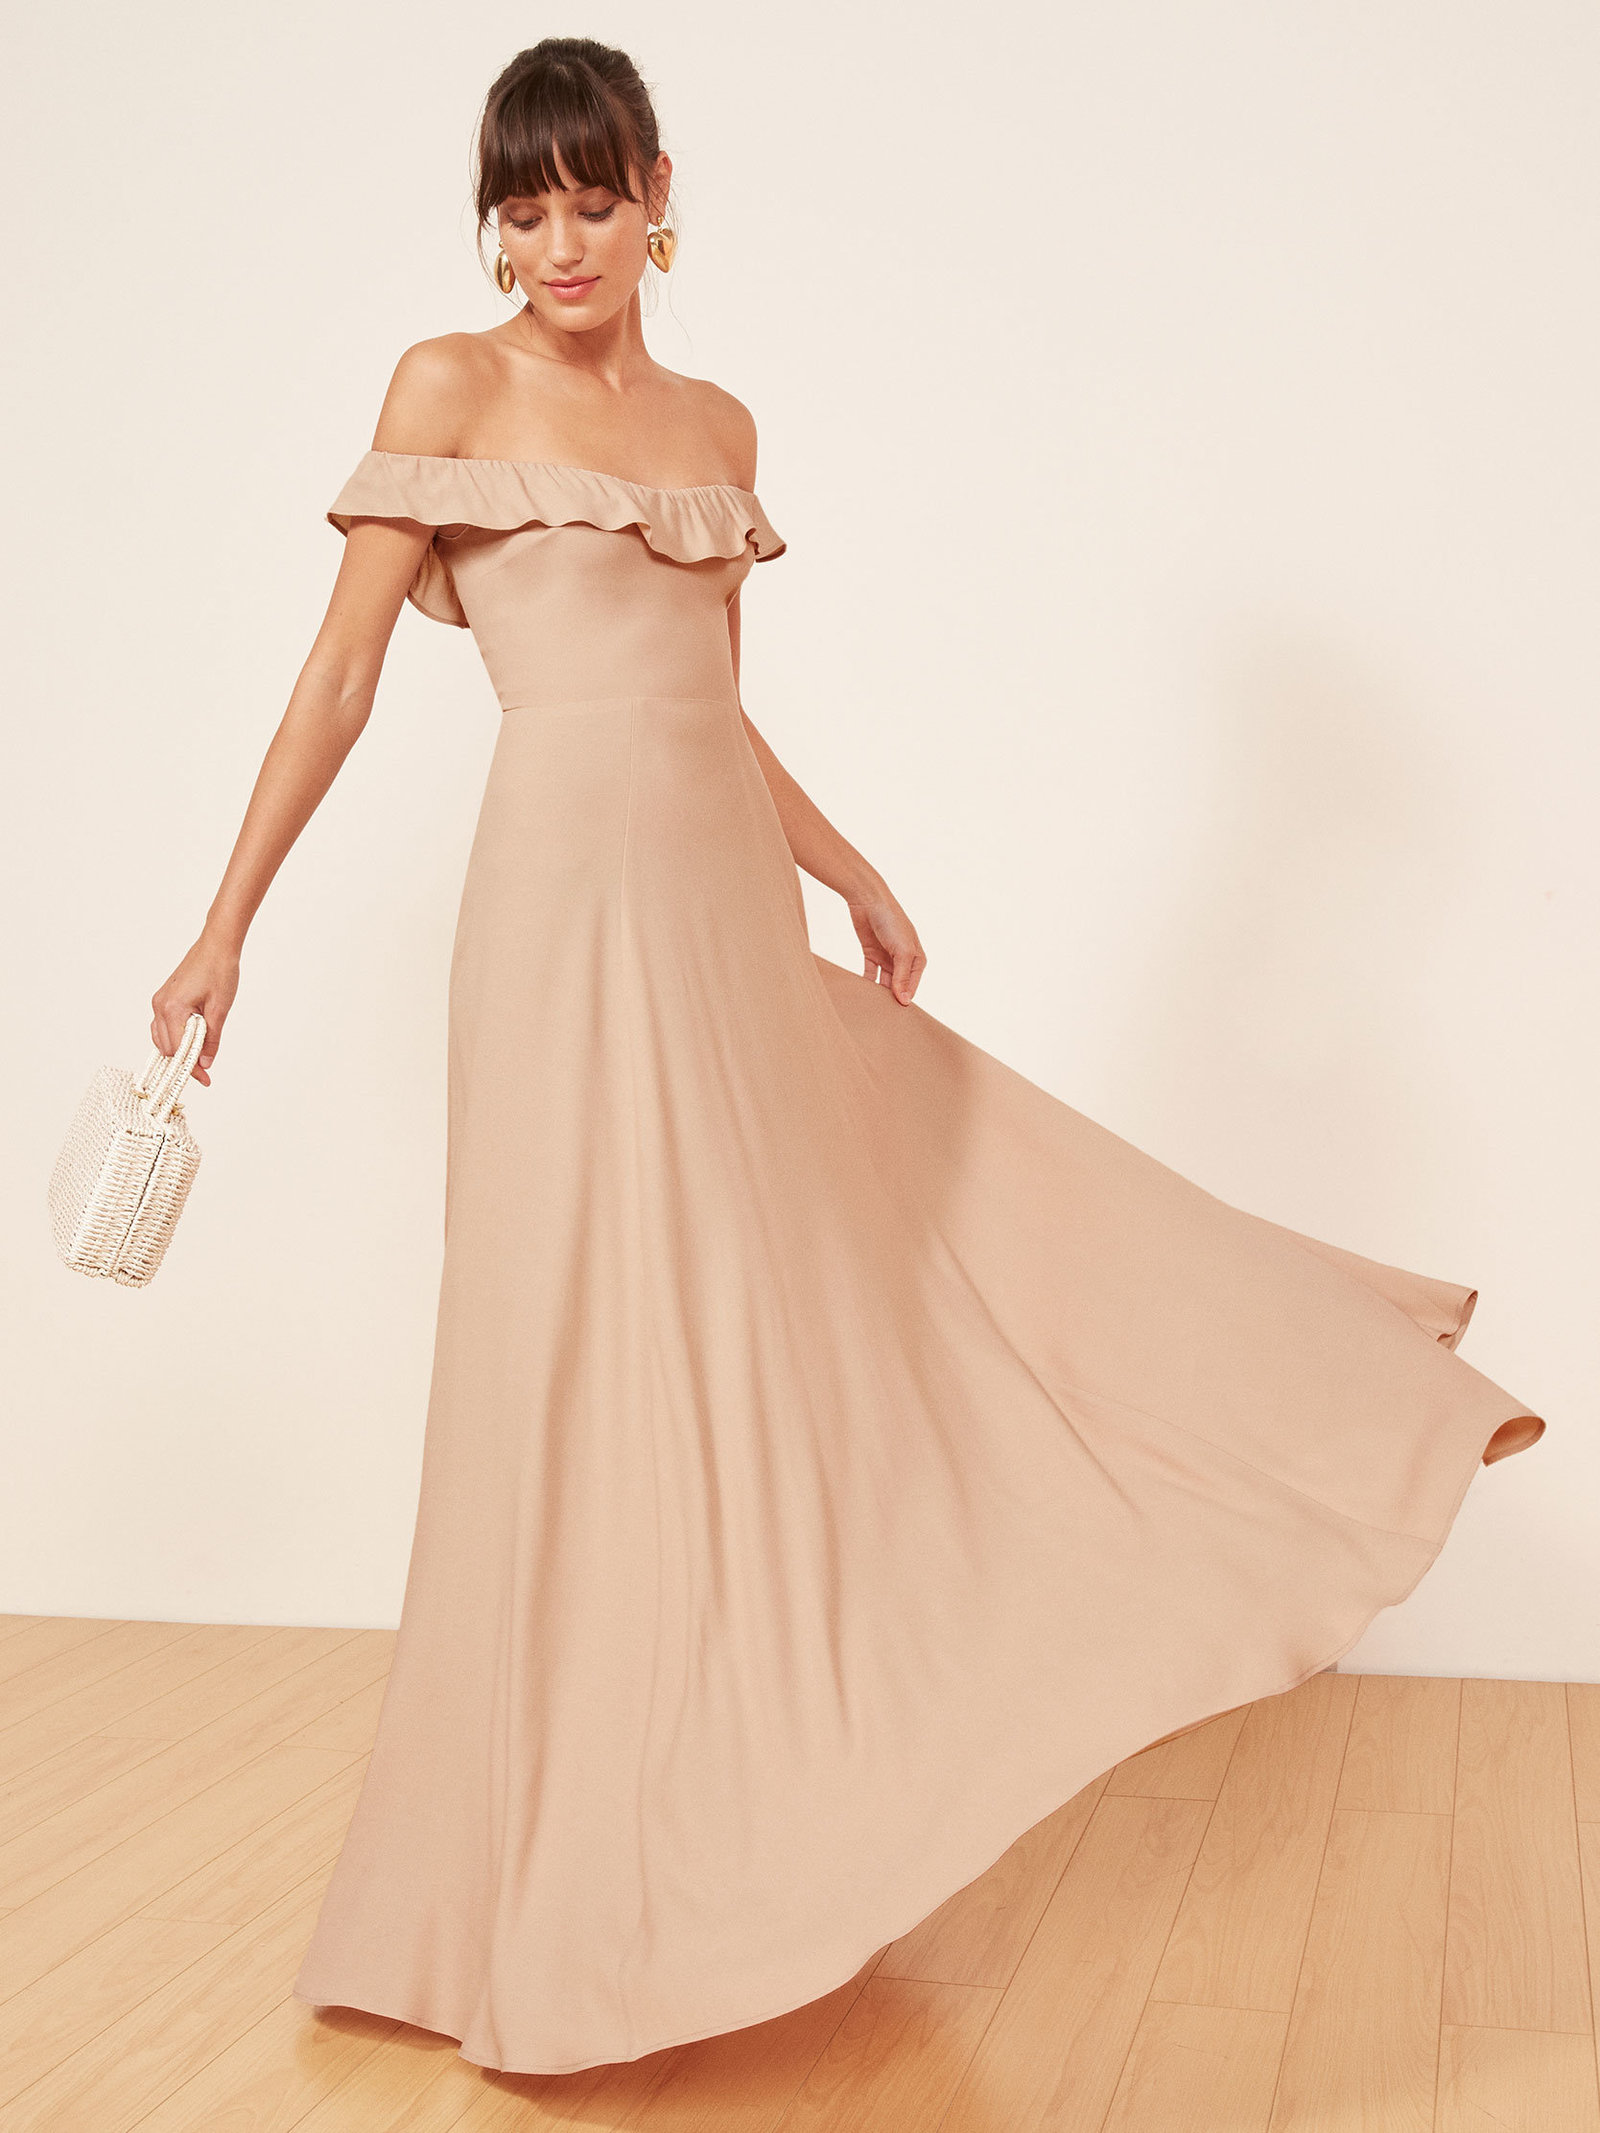 Stylish Maxi Dresses for Wedding Guests ...